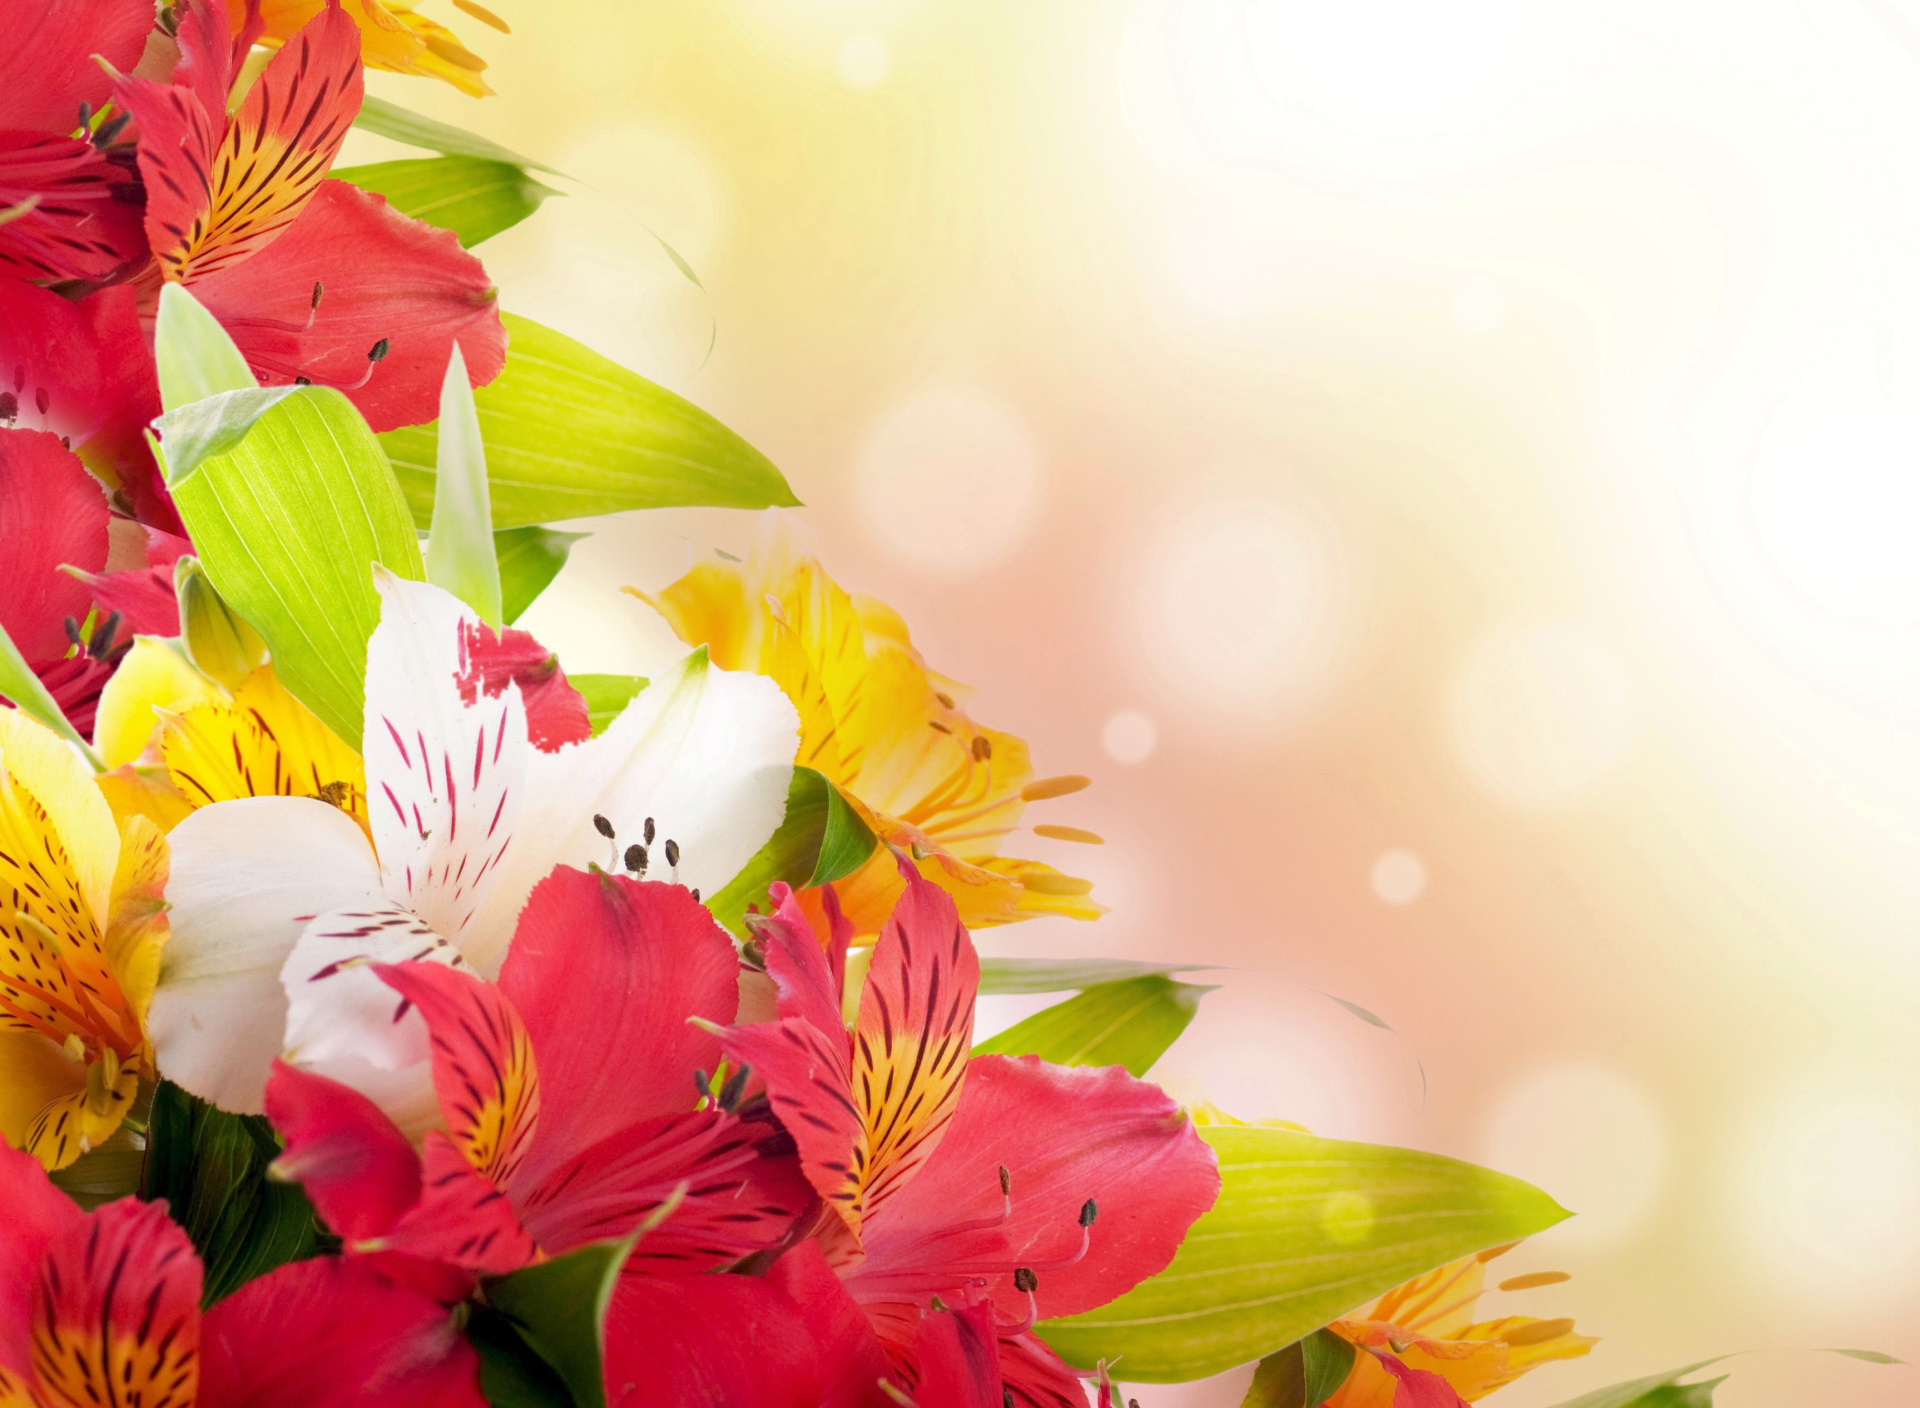 Flowers for the holiday of March 8 screenshot #1 1920x1408